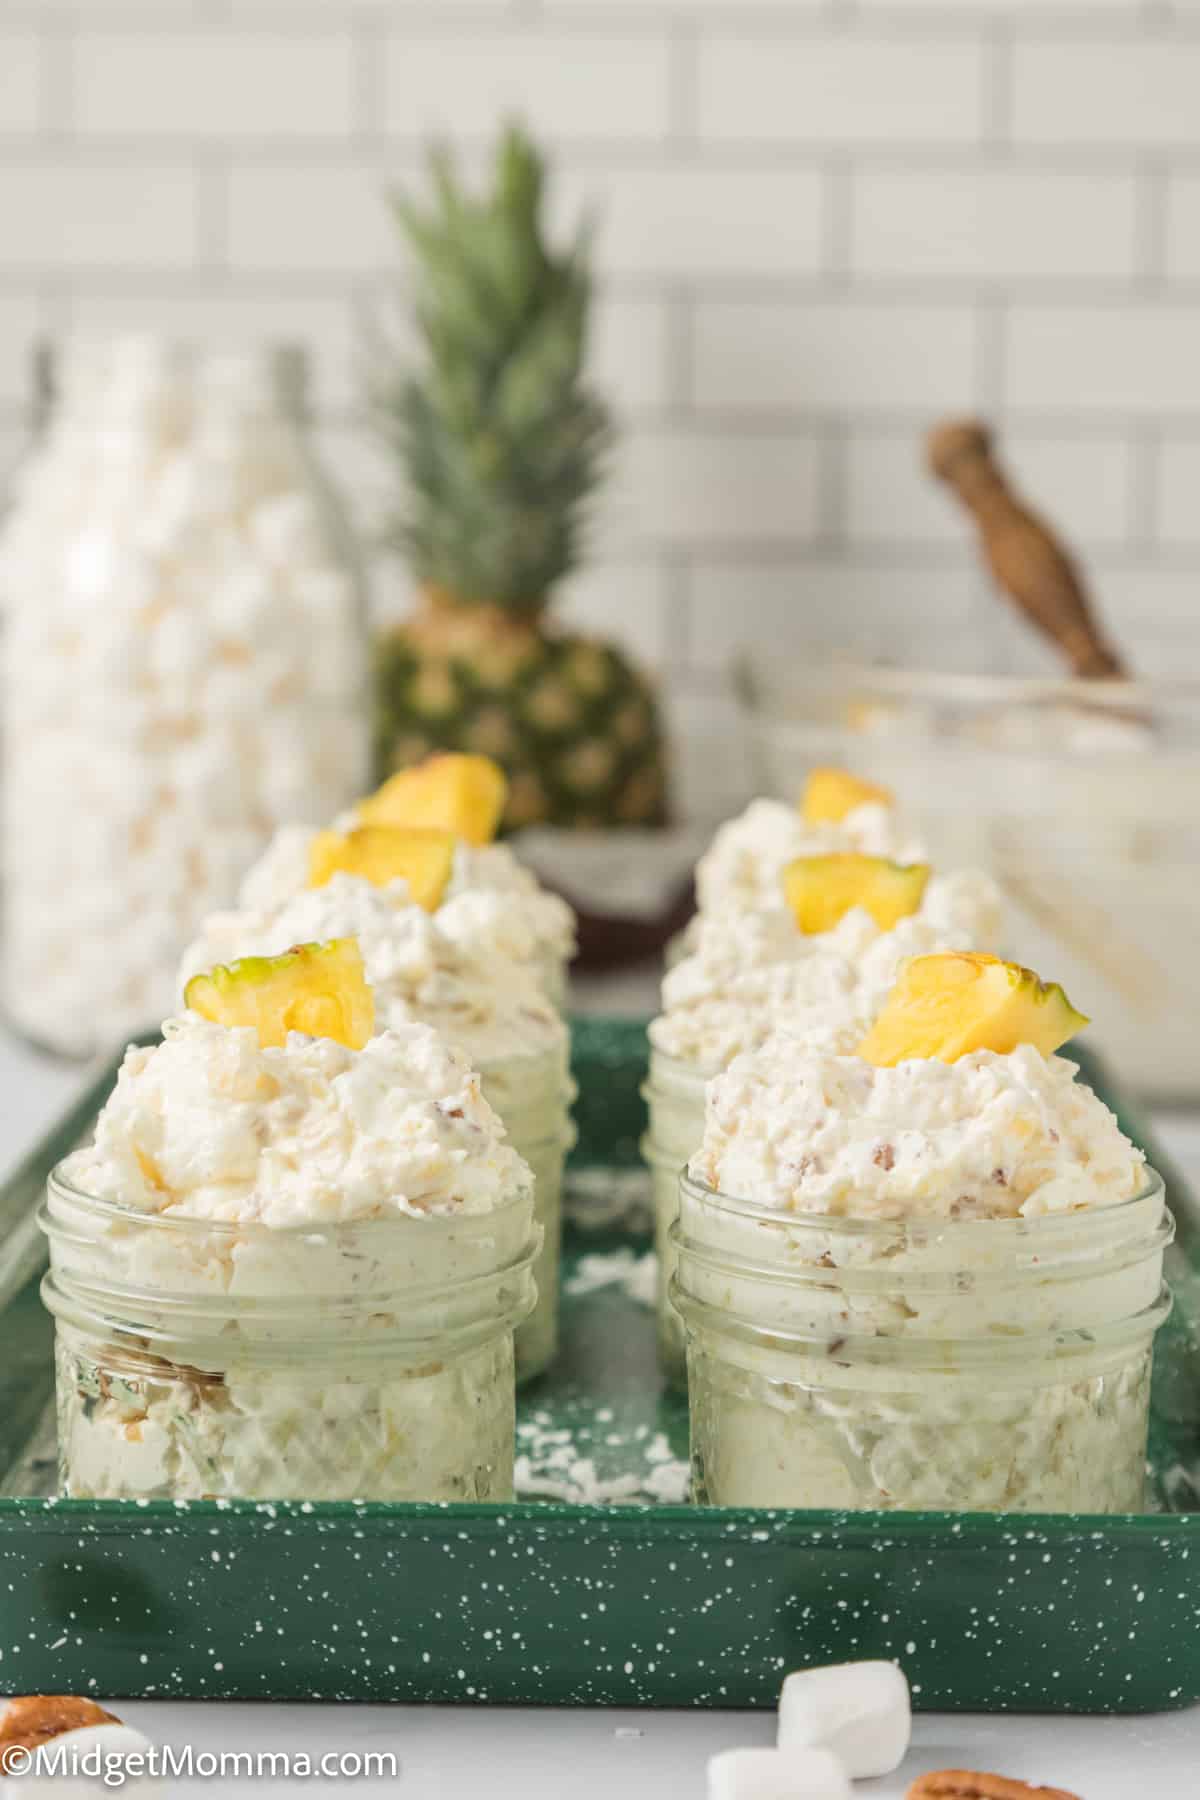 tray of individual mason jars with Then you need to make this easy pineapple fluff recipe and share it with your friends and family. This pineapple fluff recipe in them topped with a piece of fresh pineapple